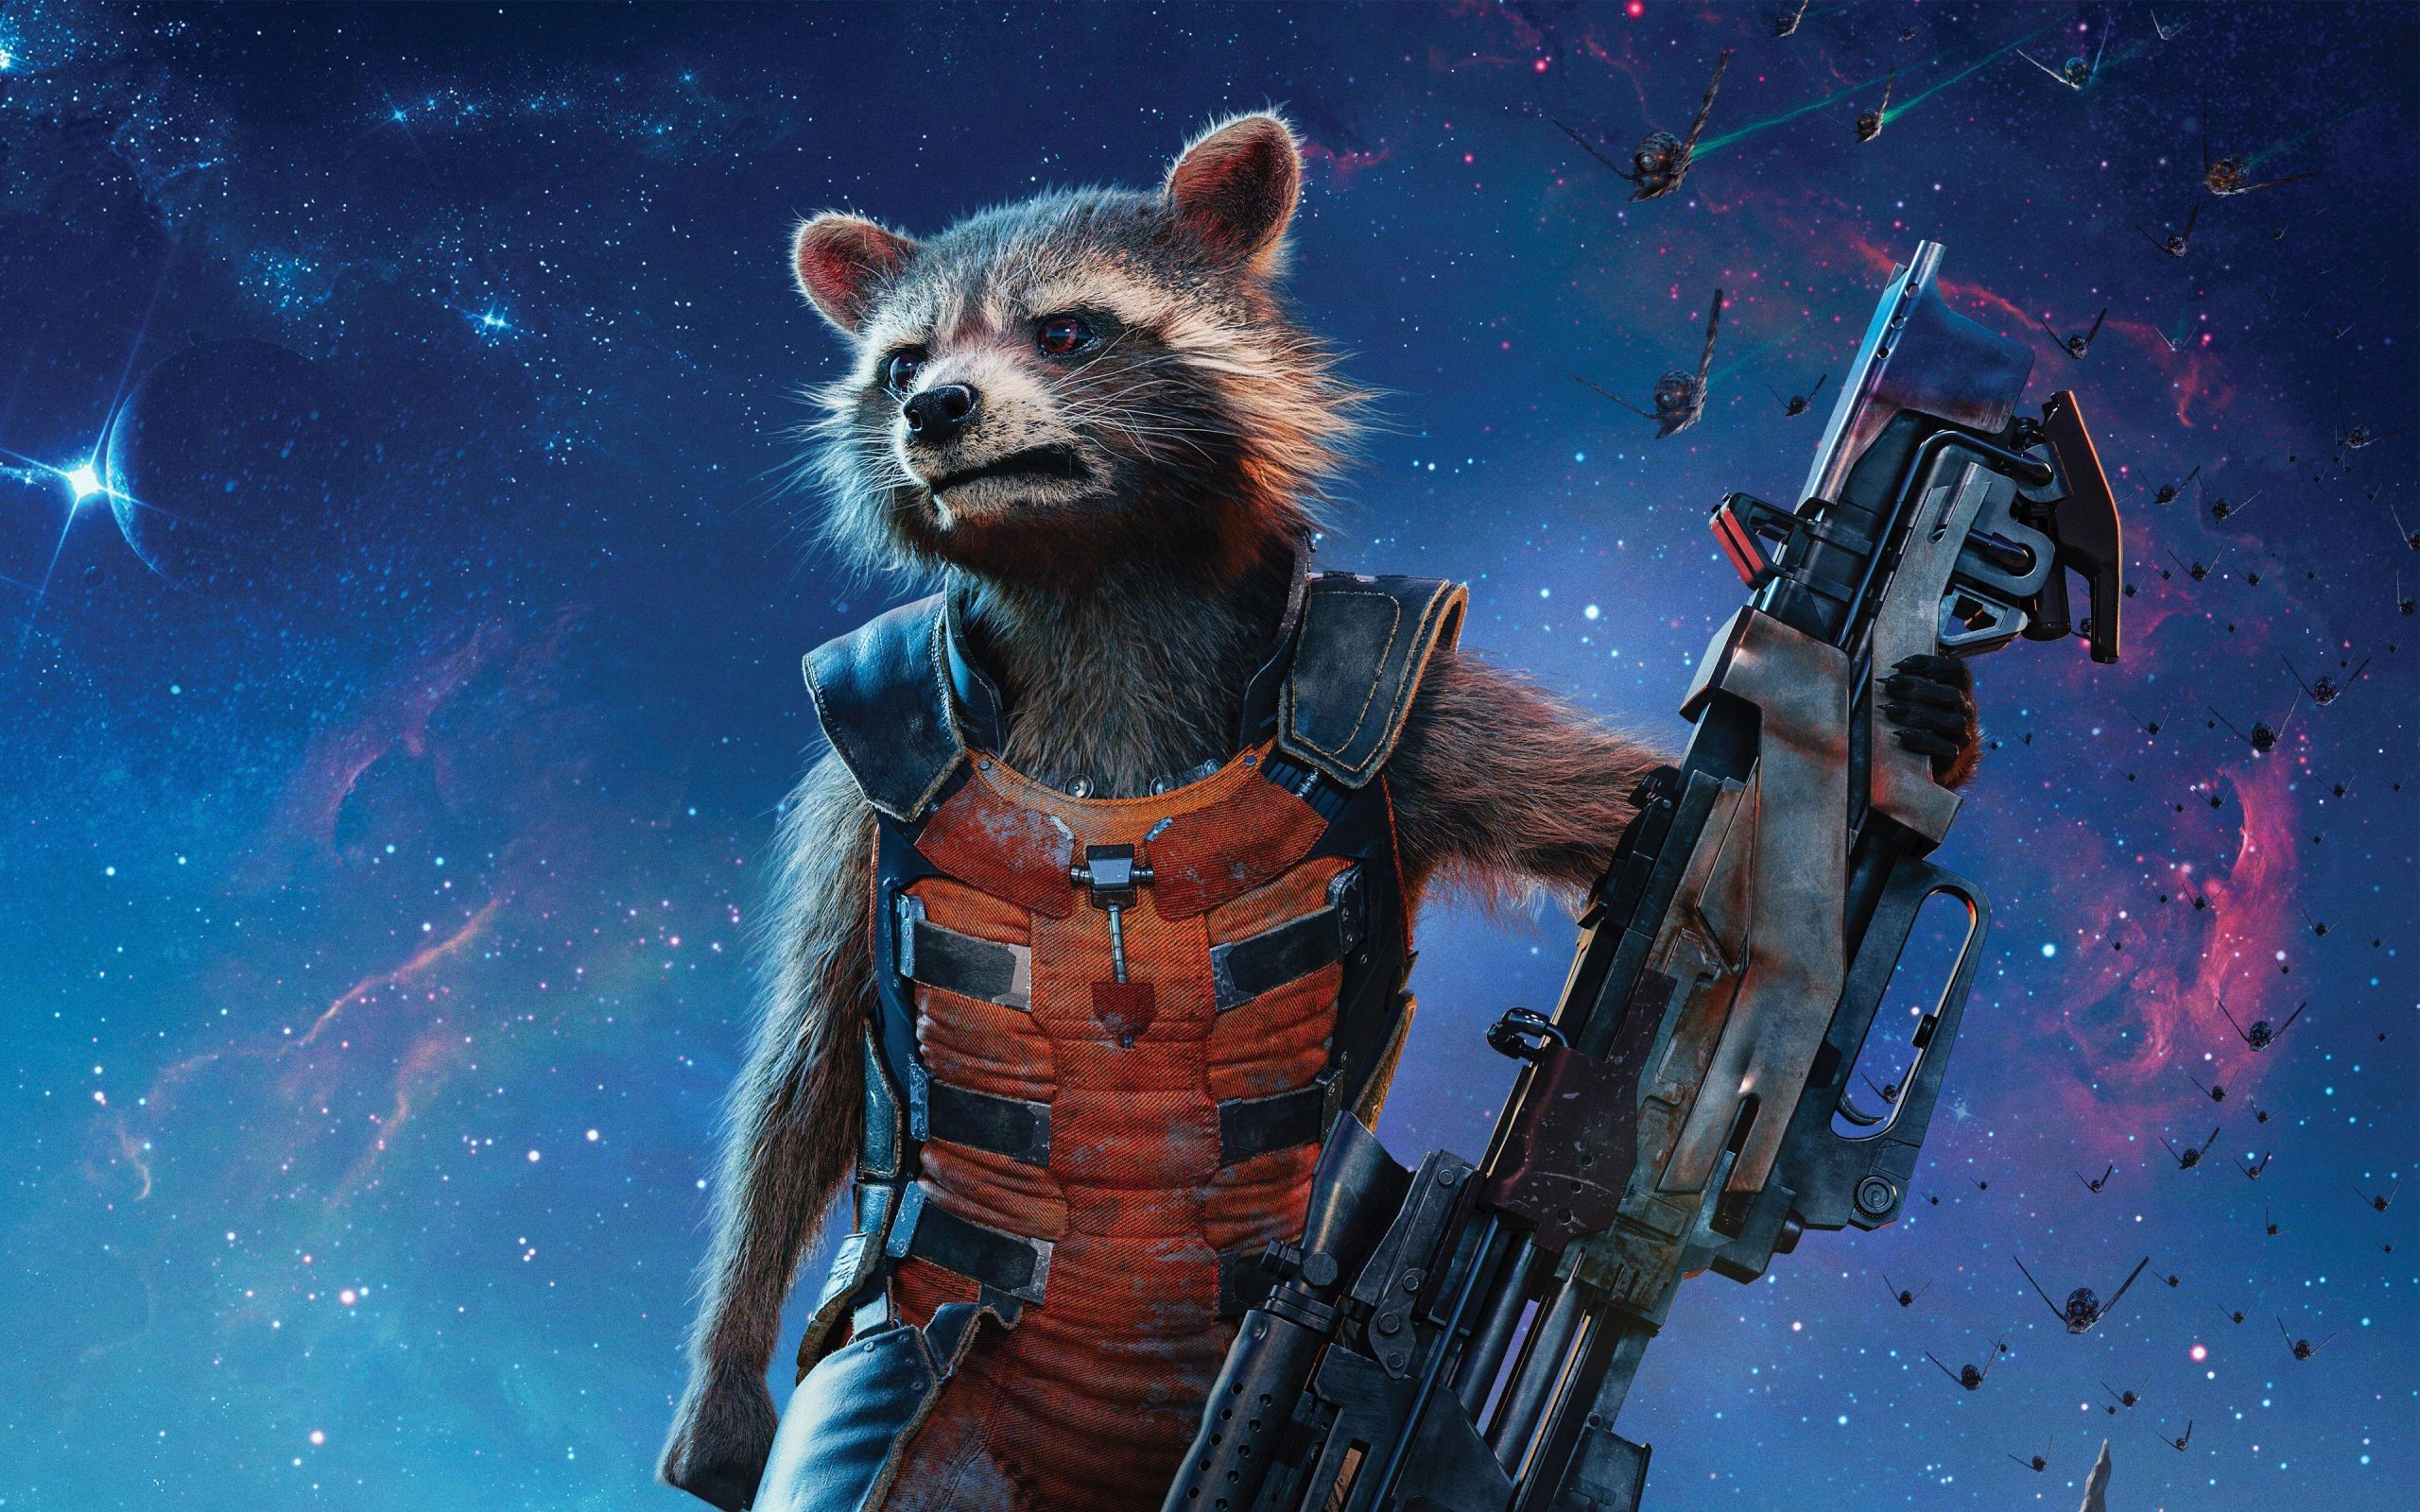 The Guardians Of The Galaxy ipad wallpaper, The Guardians Of The Galaxy, Movies